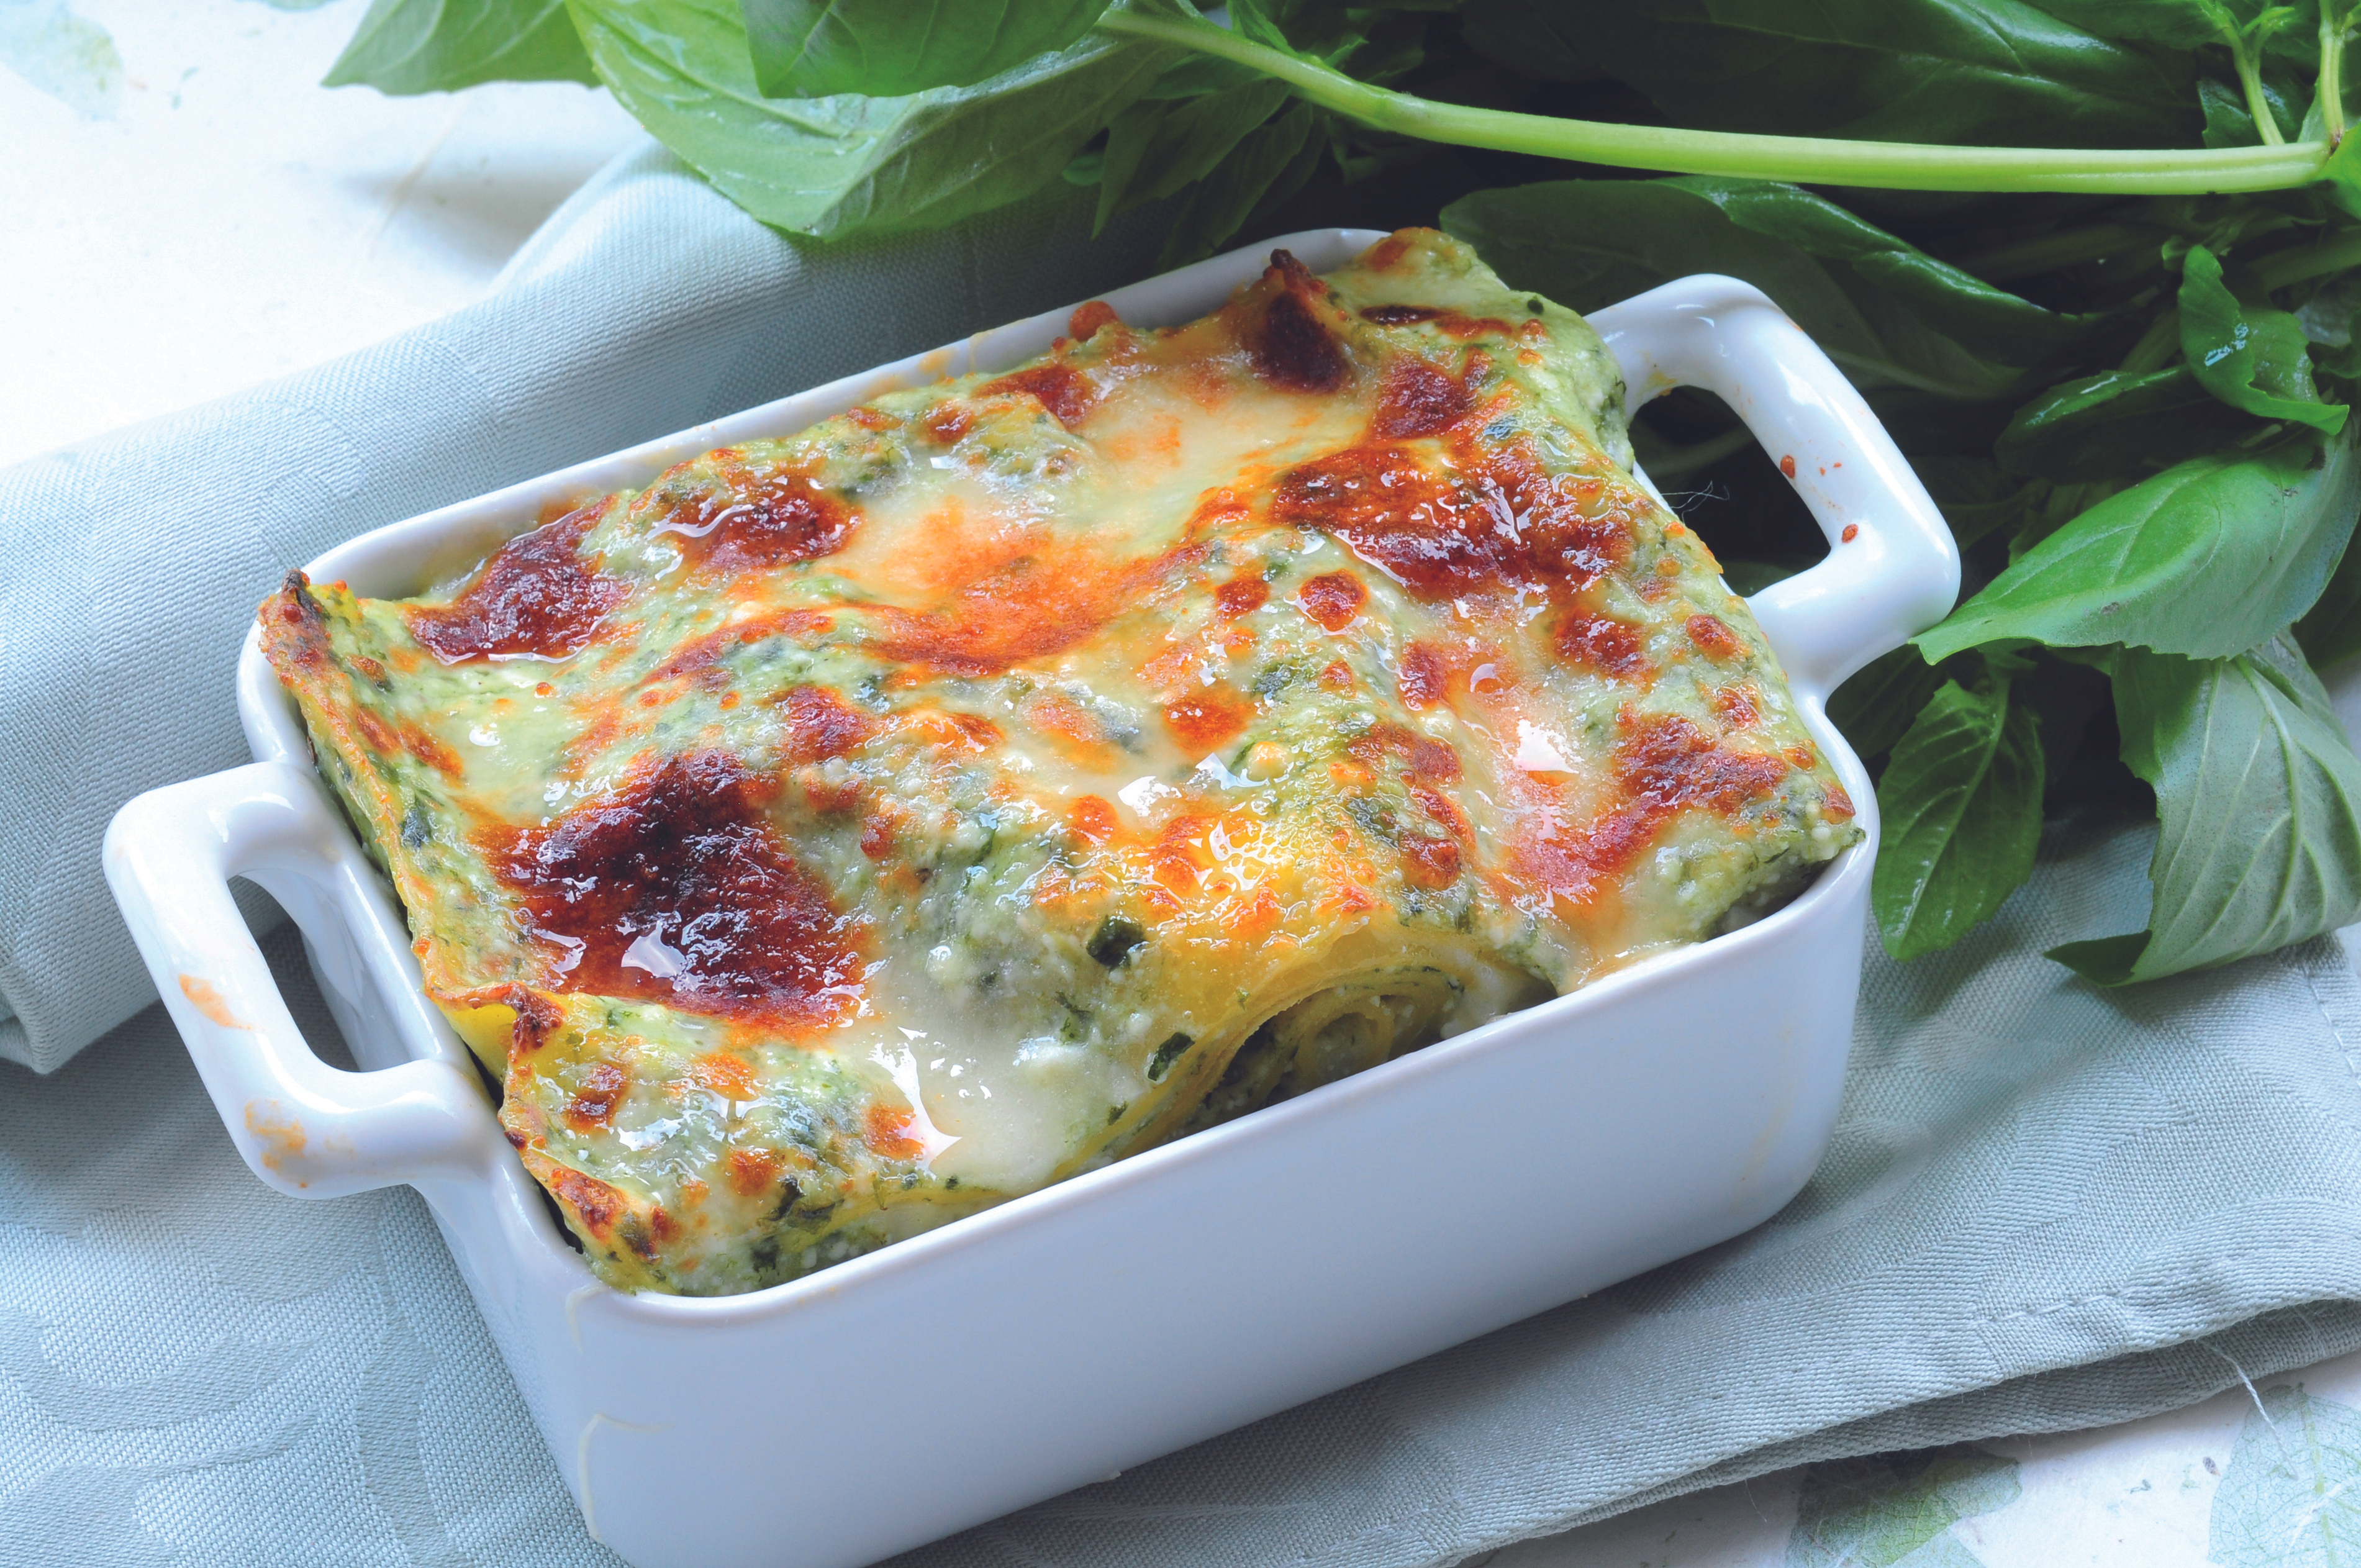 Baked spinach and cheese dish in a white ceramic container, fresh basil leaves beside it